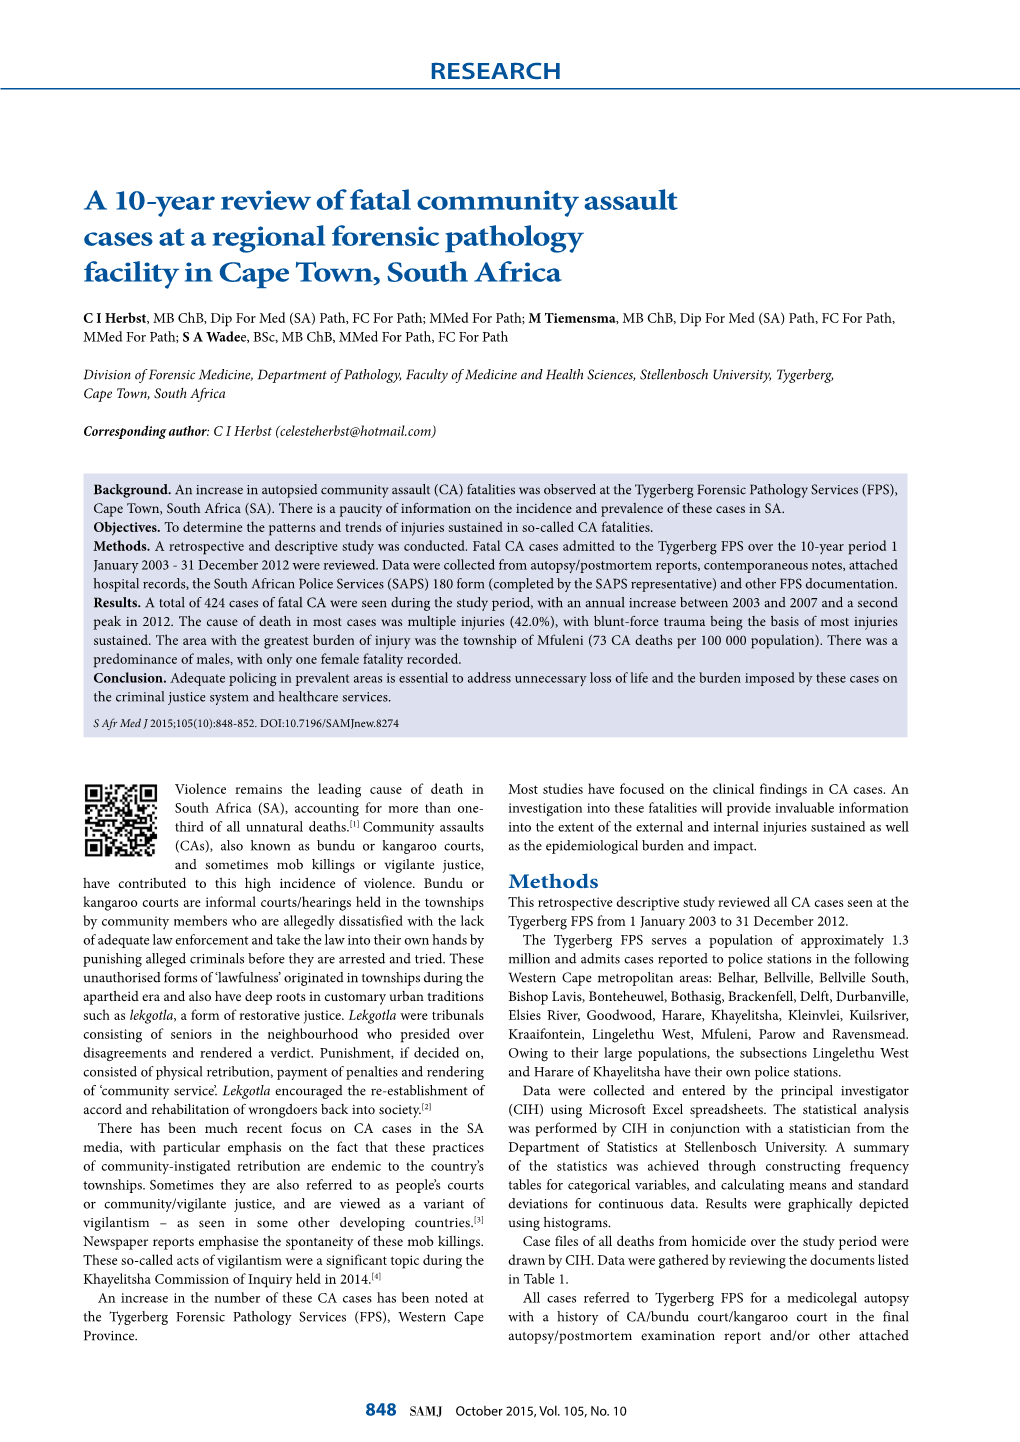 A 10-Year Review of Fatal Community Assault Cases at a Regional Forensic Pathology Facility in Cape Town, South Africa